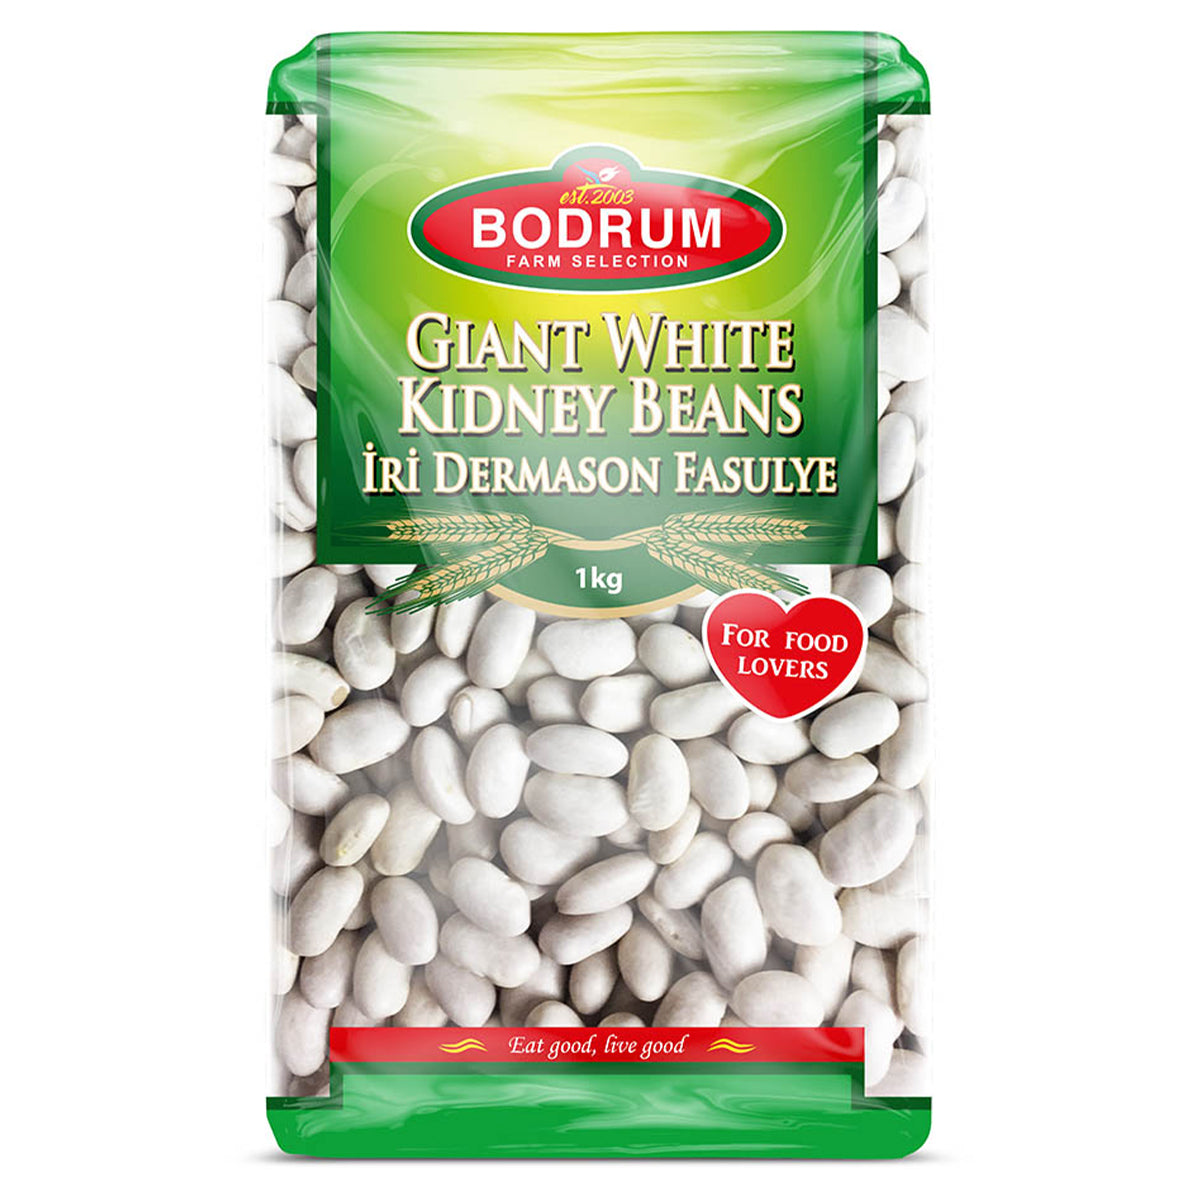 Bodrum - Giant White Kidney Beans - 1kg from the brand Bodrum.